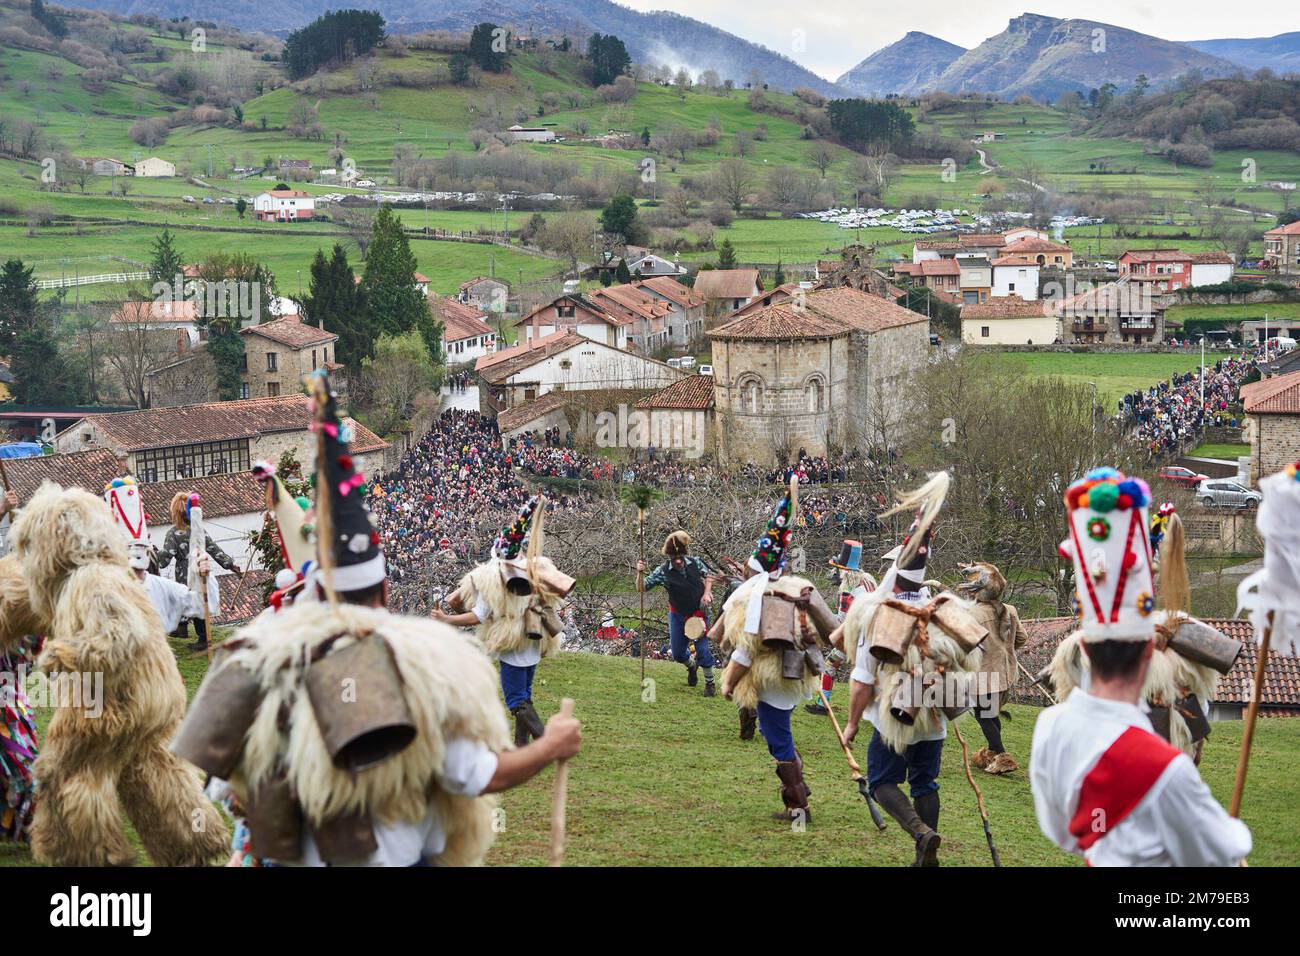 08 January 2023, Spain, Silió: Thousands of people from the church of the village watch the protagonists of the winter masquerade dance. The Vijanera, a kind of traditional carnival in northern Spain, is an ethnographic celebration that takes place at the winter solstice. Villagers dressed in natural costumes dance loudly to welcome the New Year and drive away evil spirits. Photo: Felipe Passolas/dpa Stock Photo